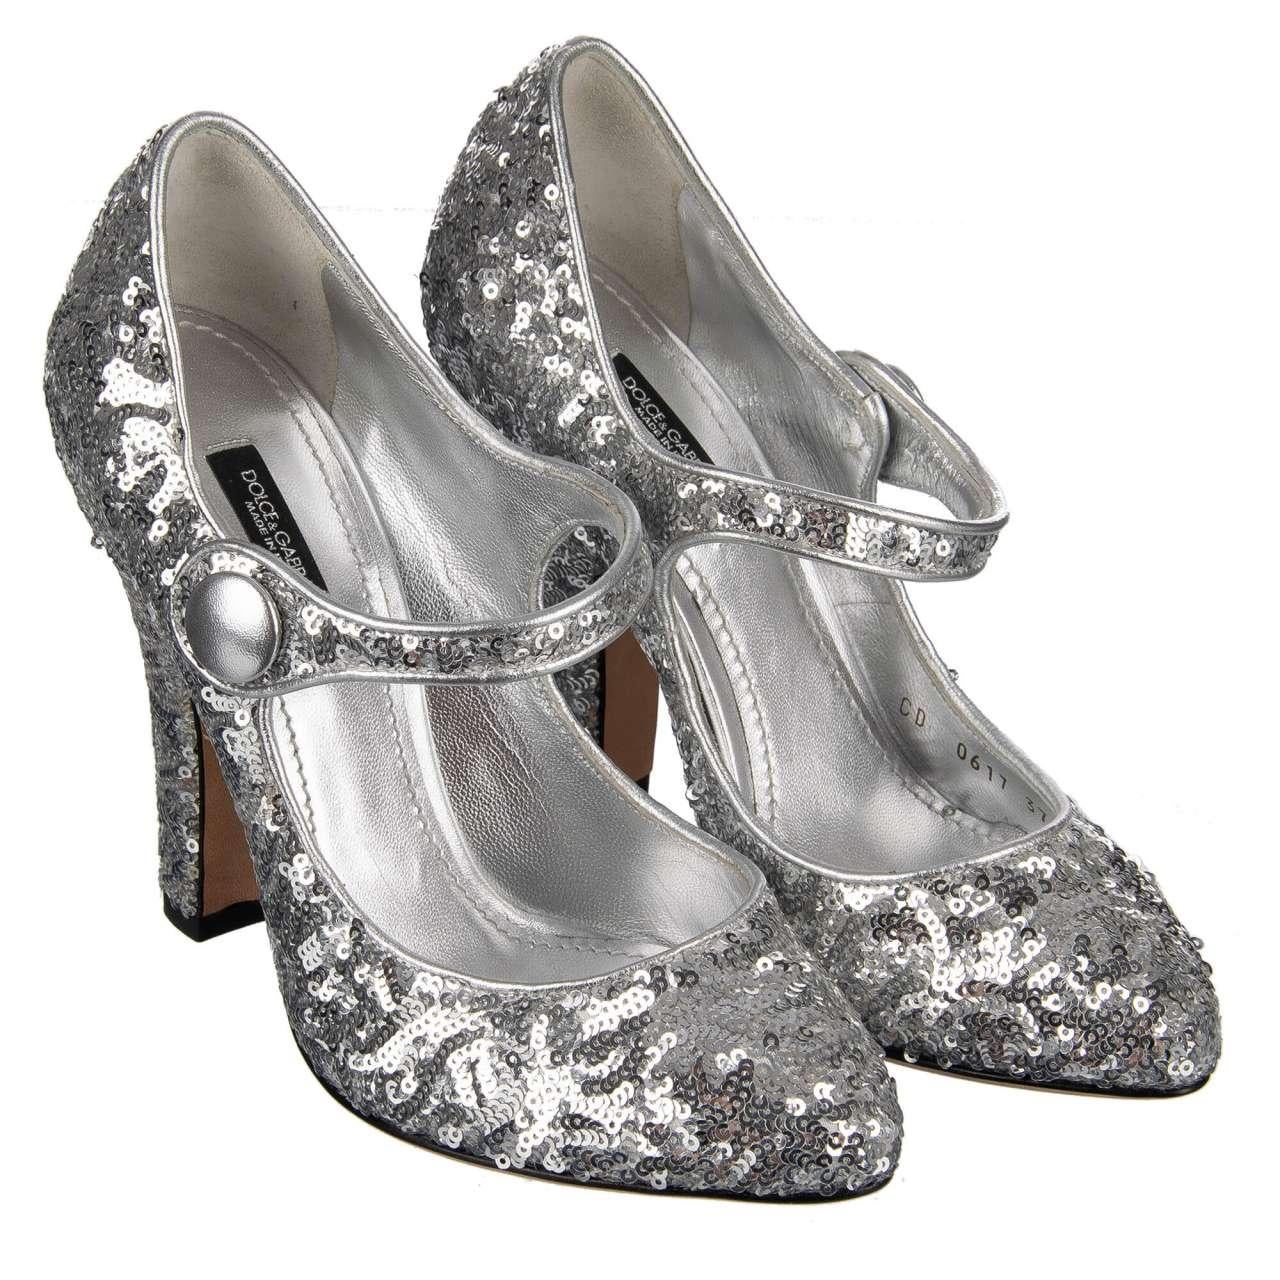 Dolce & Gabbana - Sequined Mary Janes VALLY Silver EUR 35.5 For Sale 1